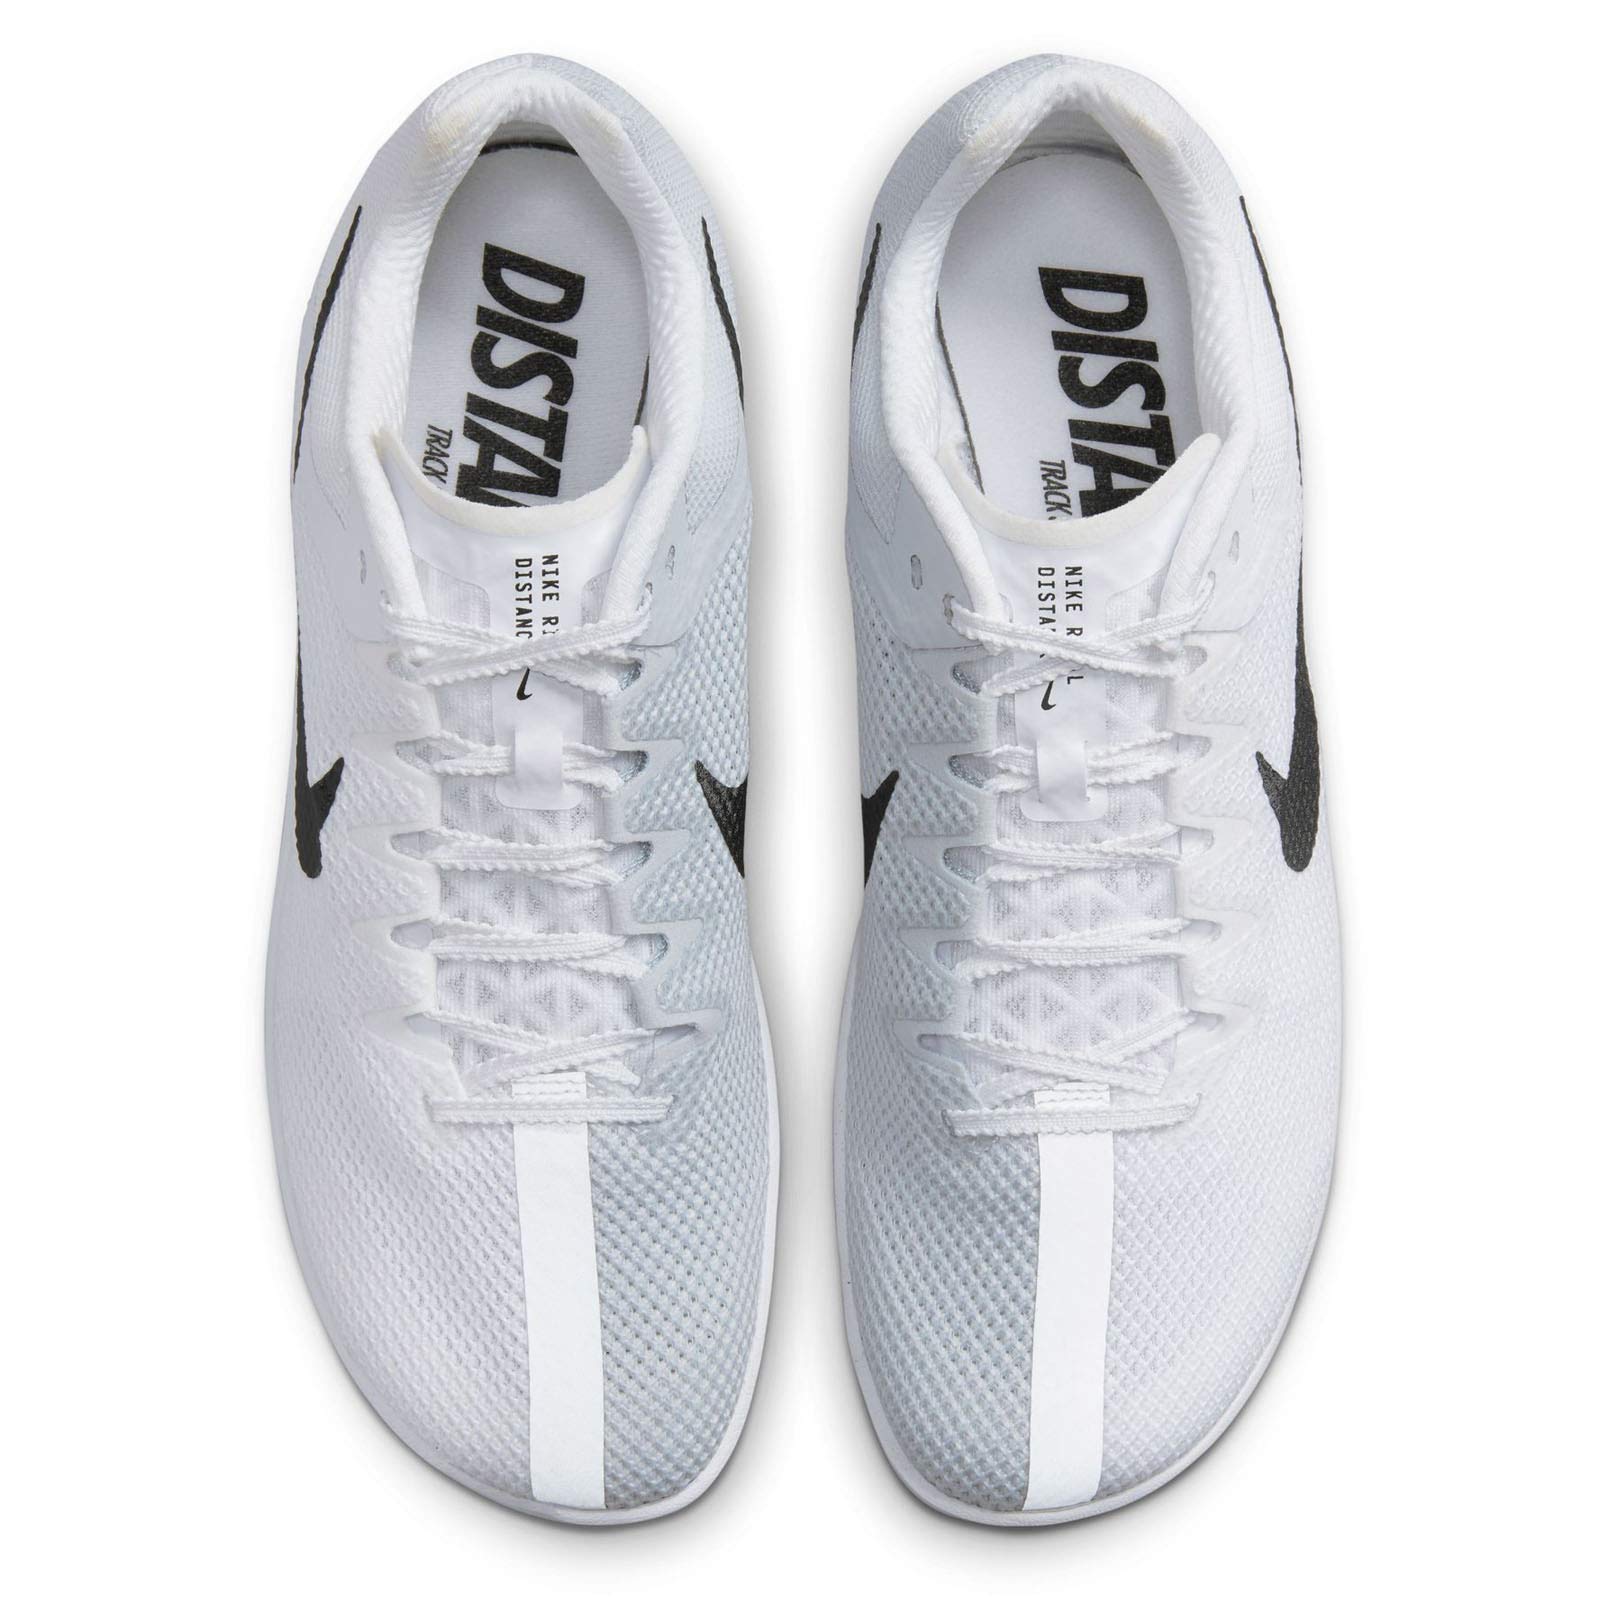 NIKE ZOOM RIVAL TRACK & FIELD DISTANCE SPIKES